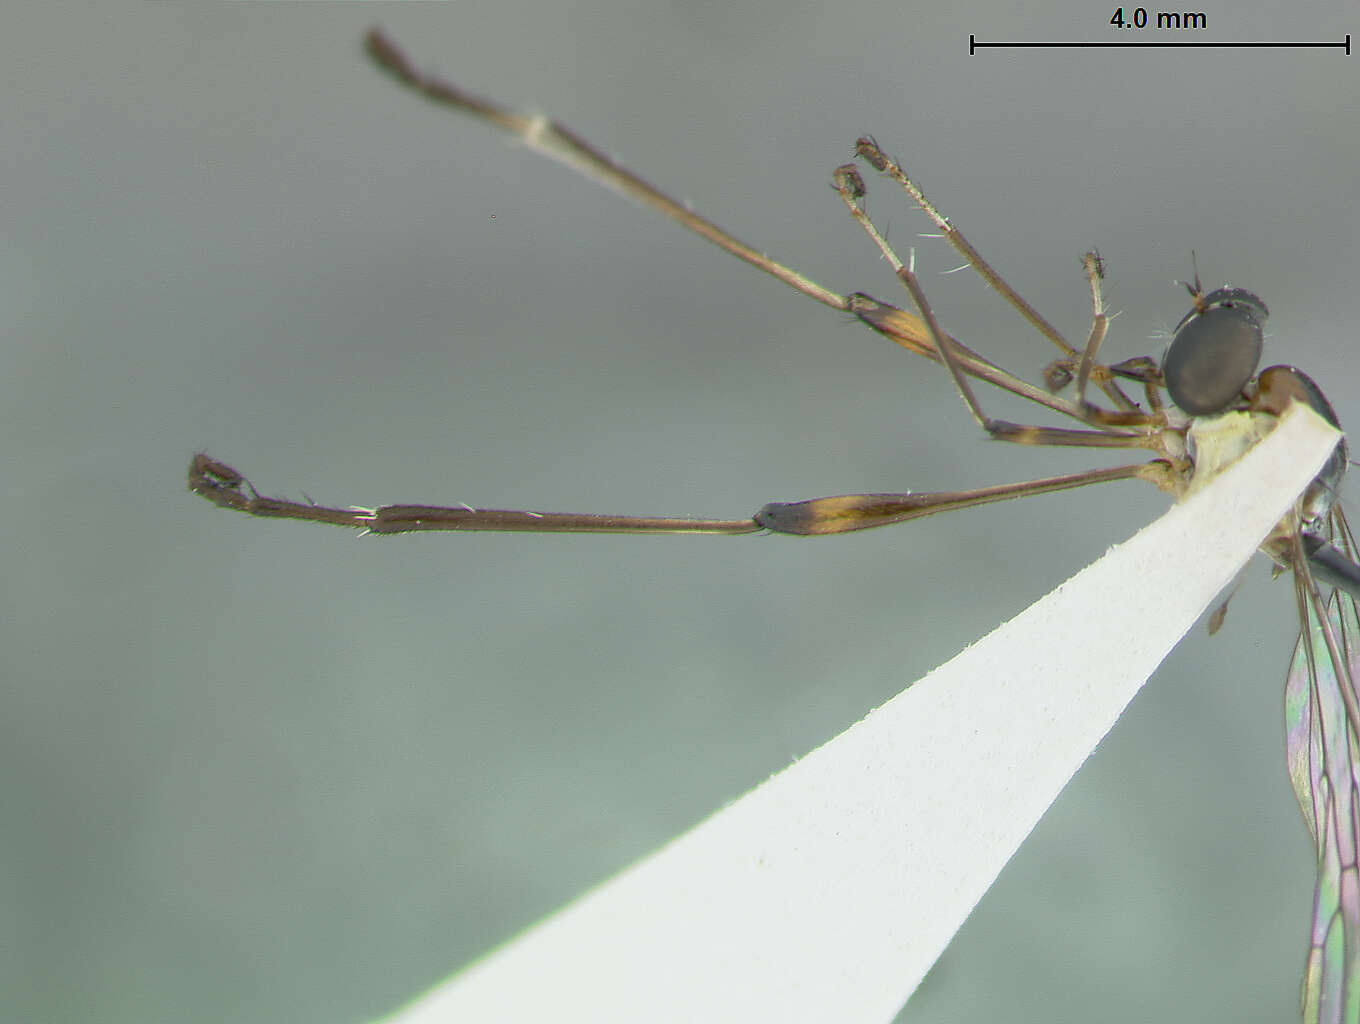 Image of Leptogaster bengryi Farr 1963